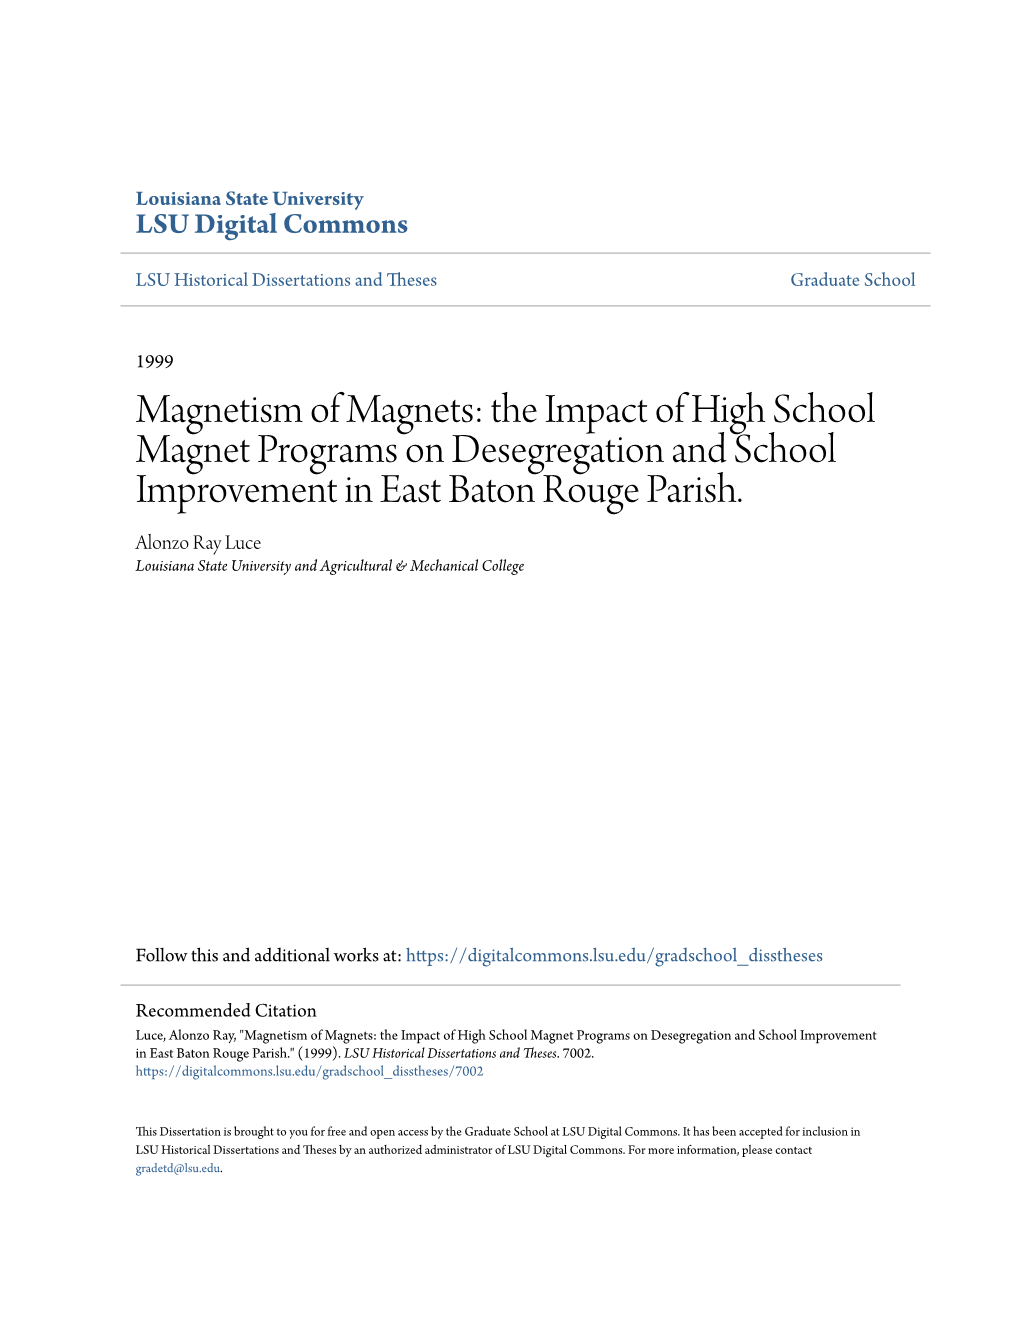 The Impact of High School Magnet Programs on Desegregation and School Improvement in East Baton Rouge Parish